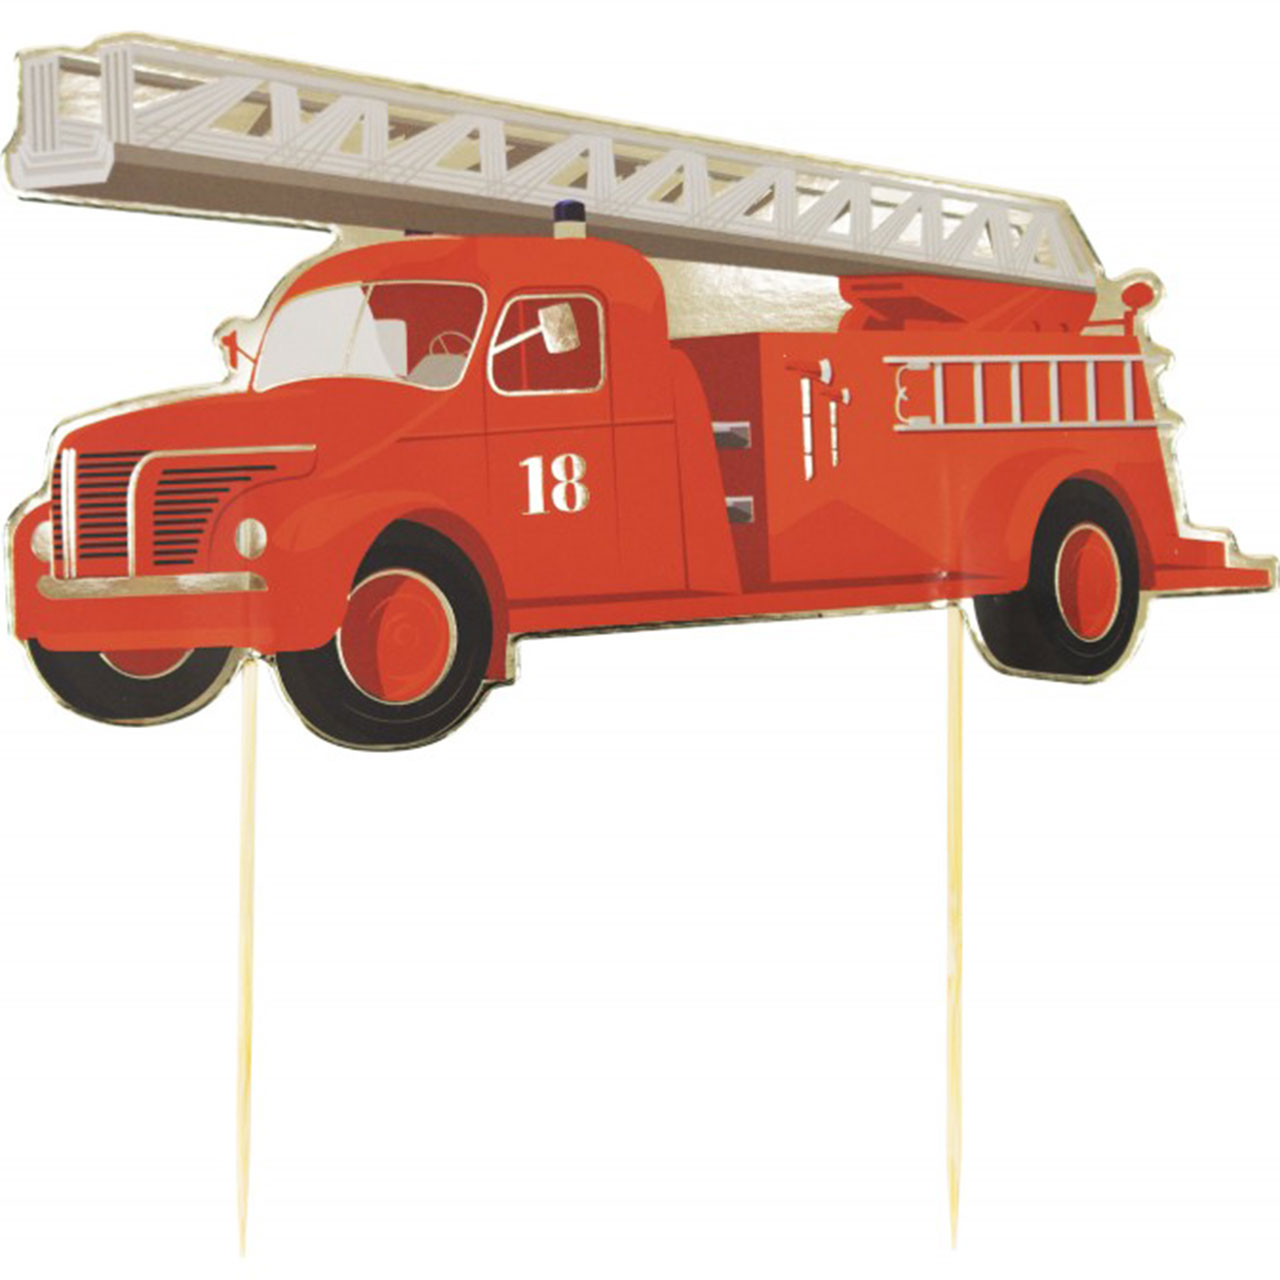 6 Fire Engine Cake Toppers 